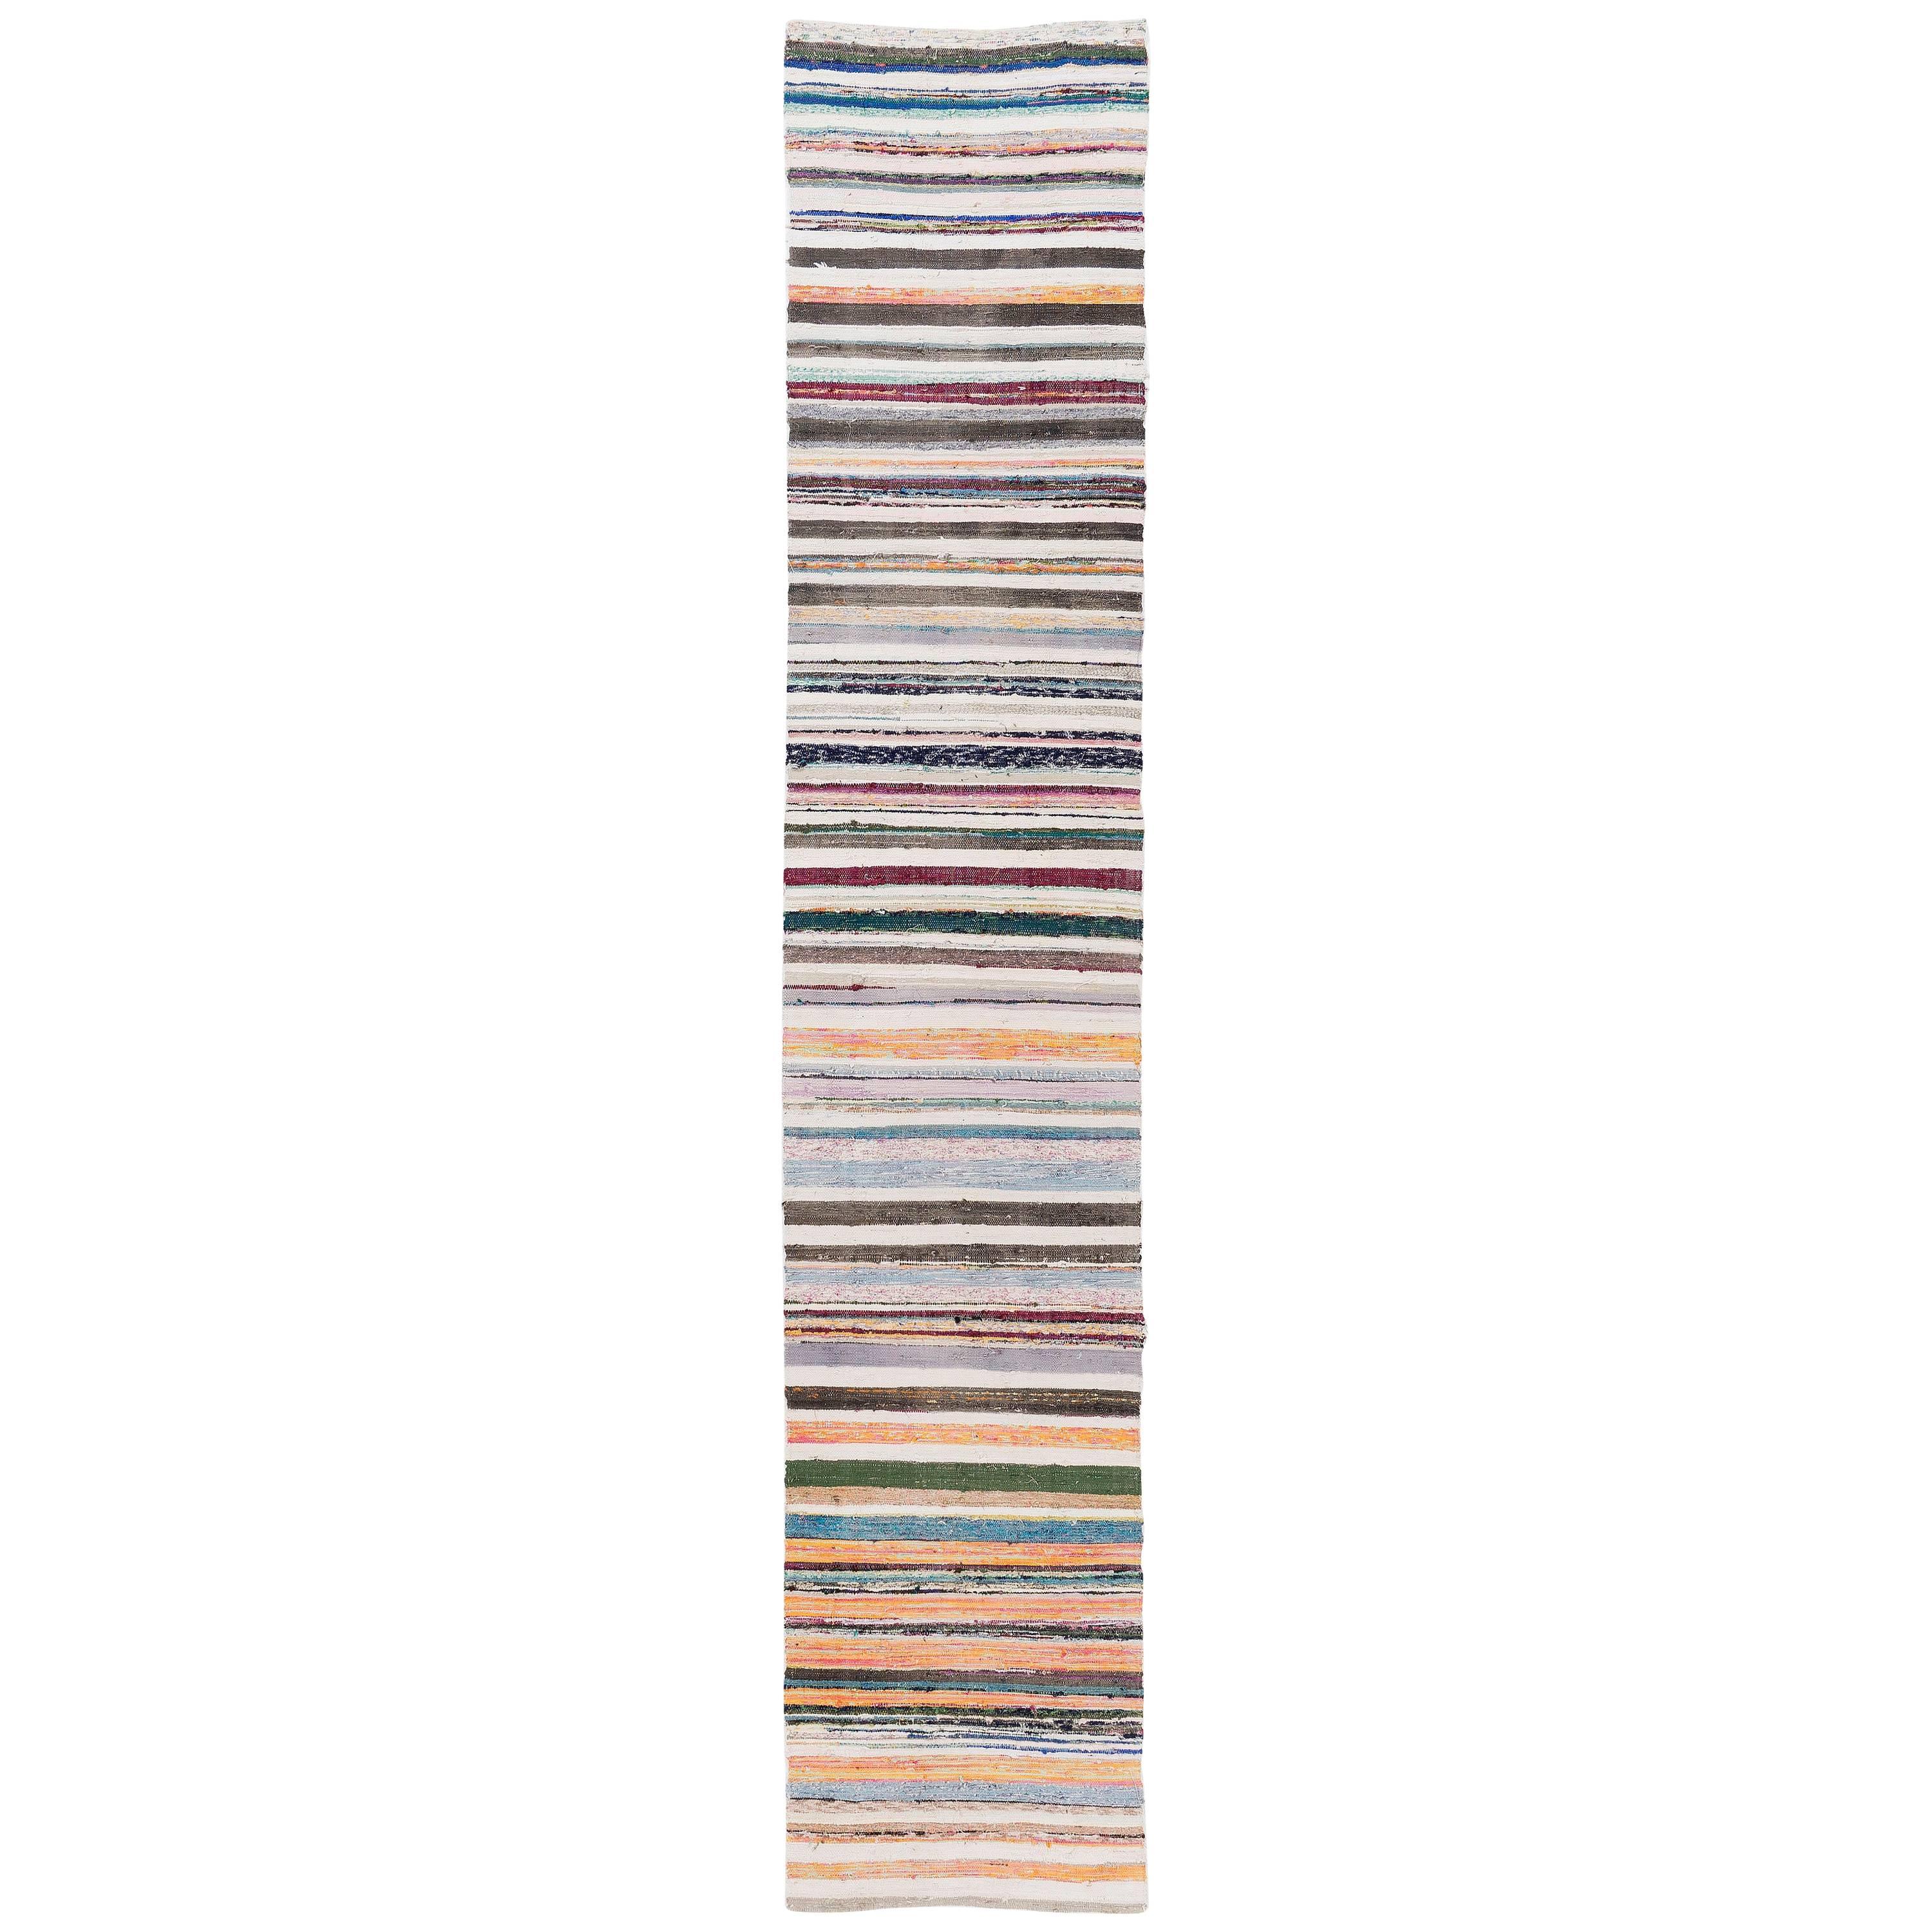 Colorful Striped Kilim Runner, Cotton Flat-Weave Rug